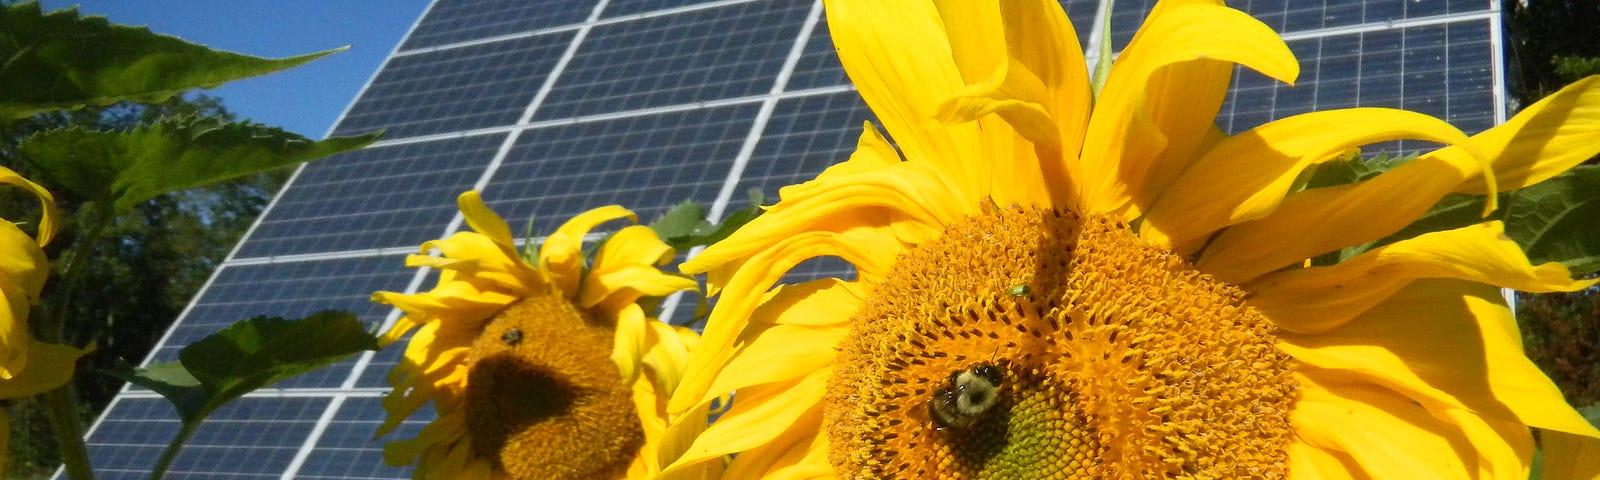 Sunflower with bee next to solar panels